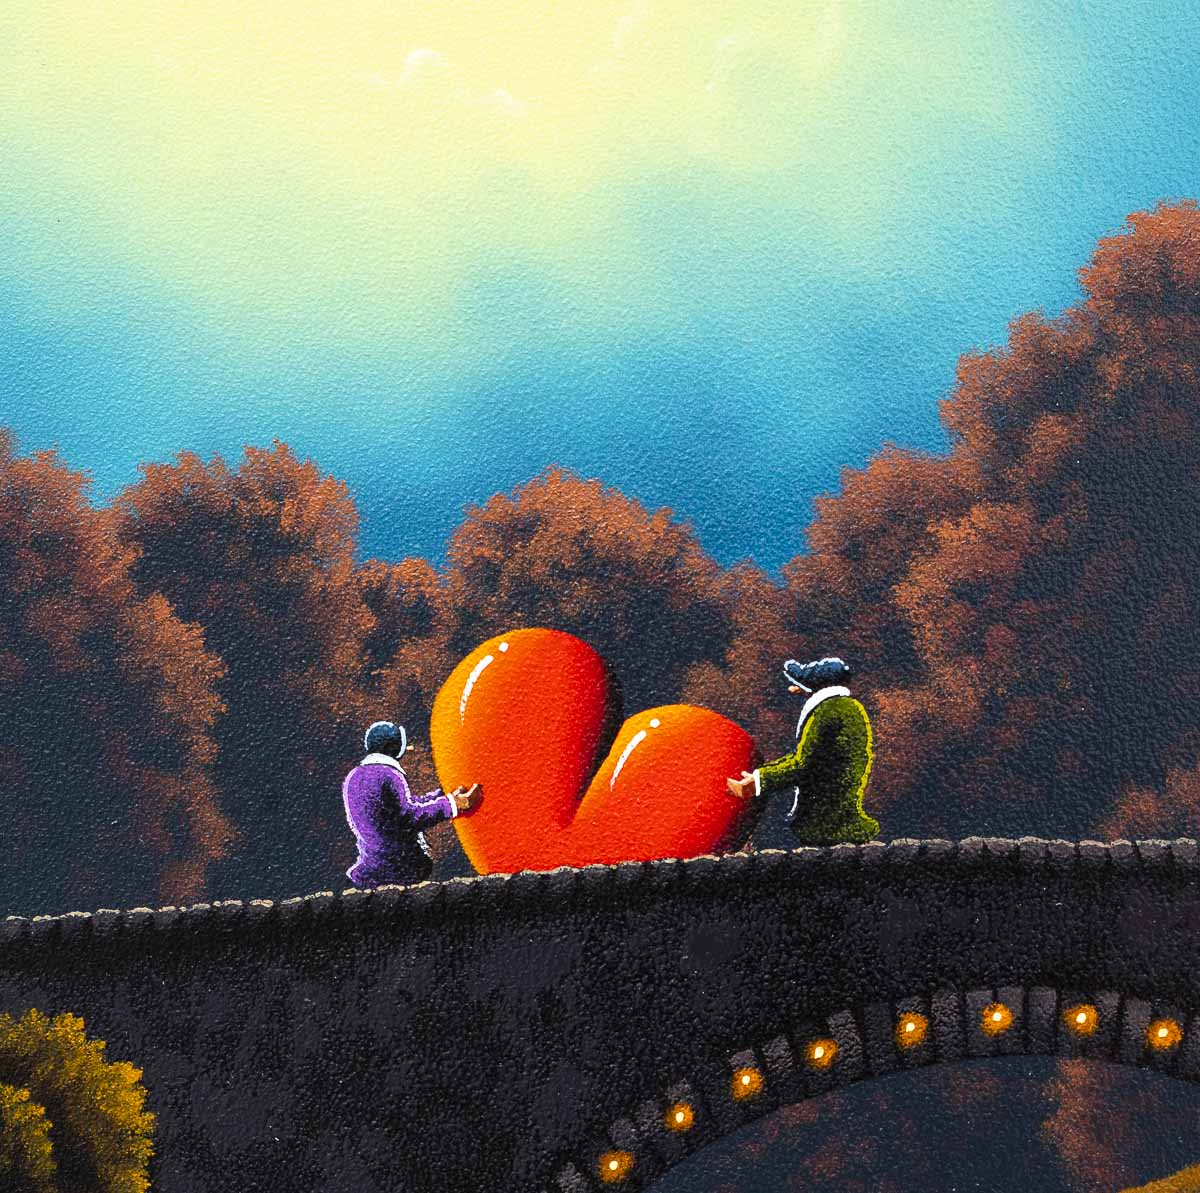 We'll Cross That Bridge When We Come to it - Original - HOLDING BACK FOR DR SHOW David Renshaw Original